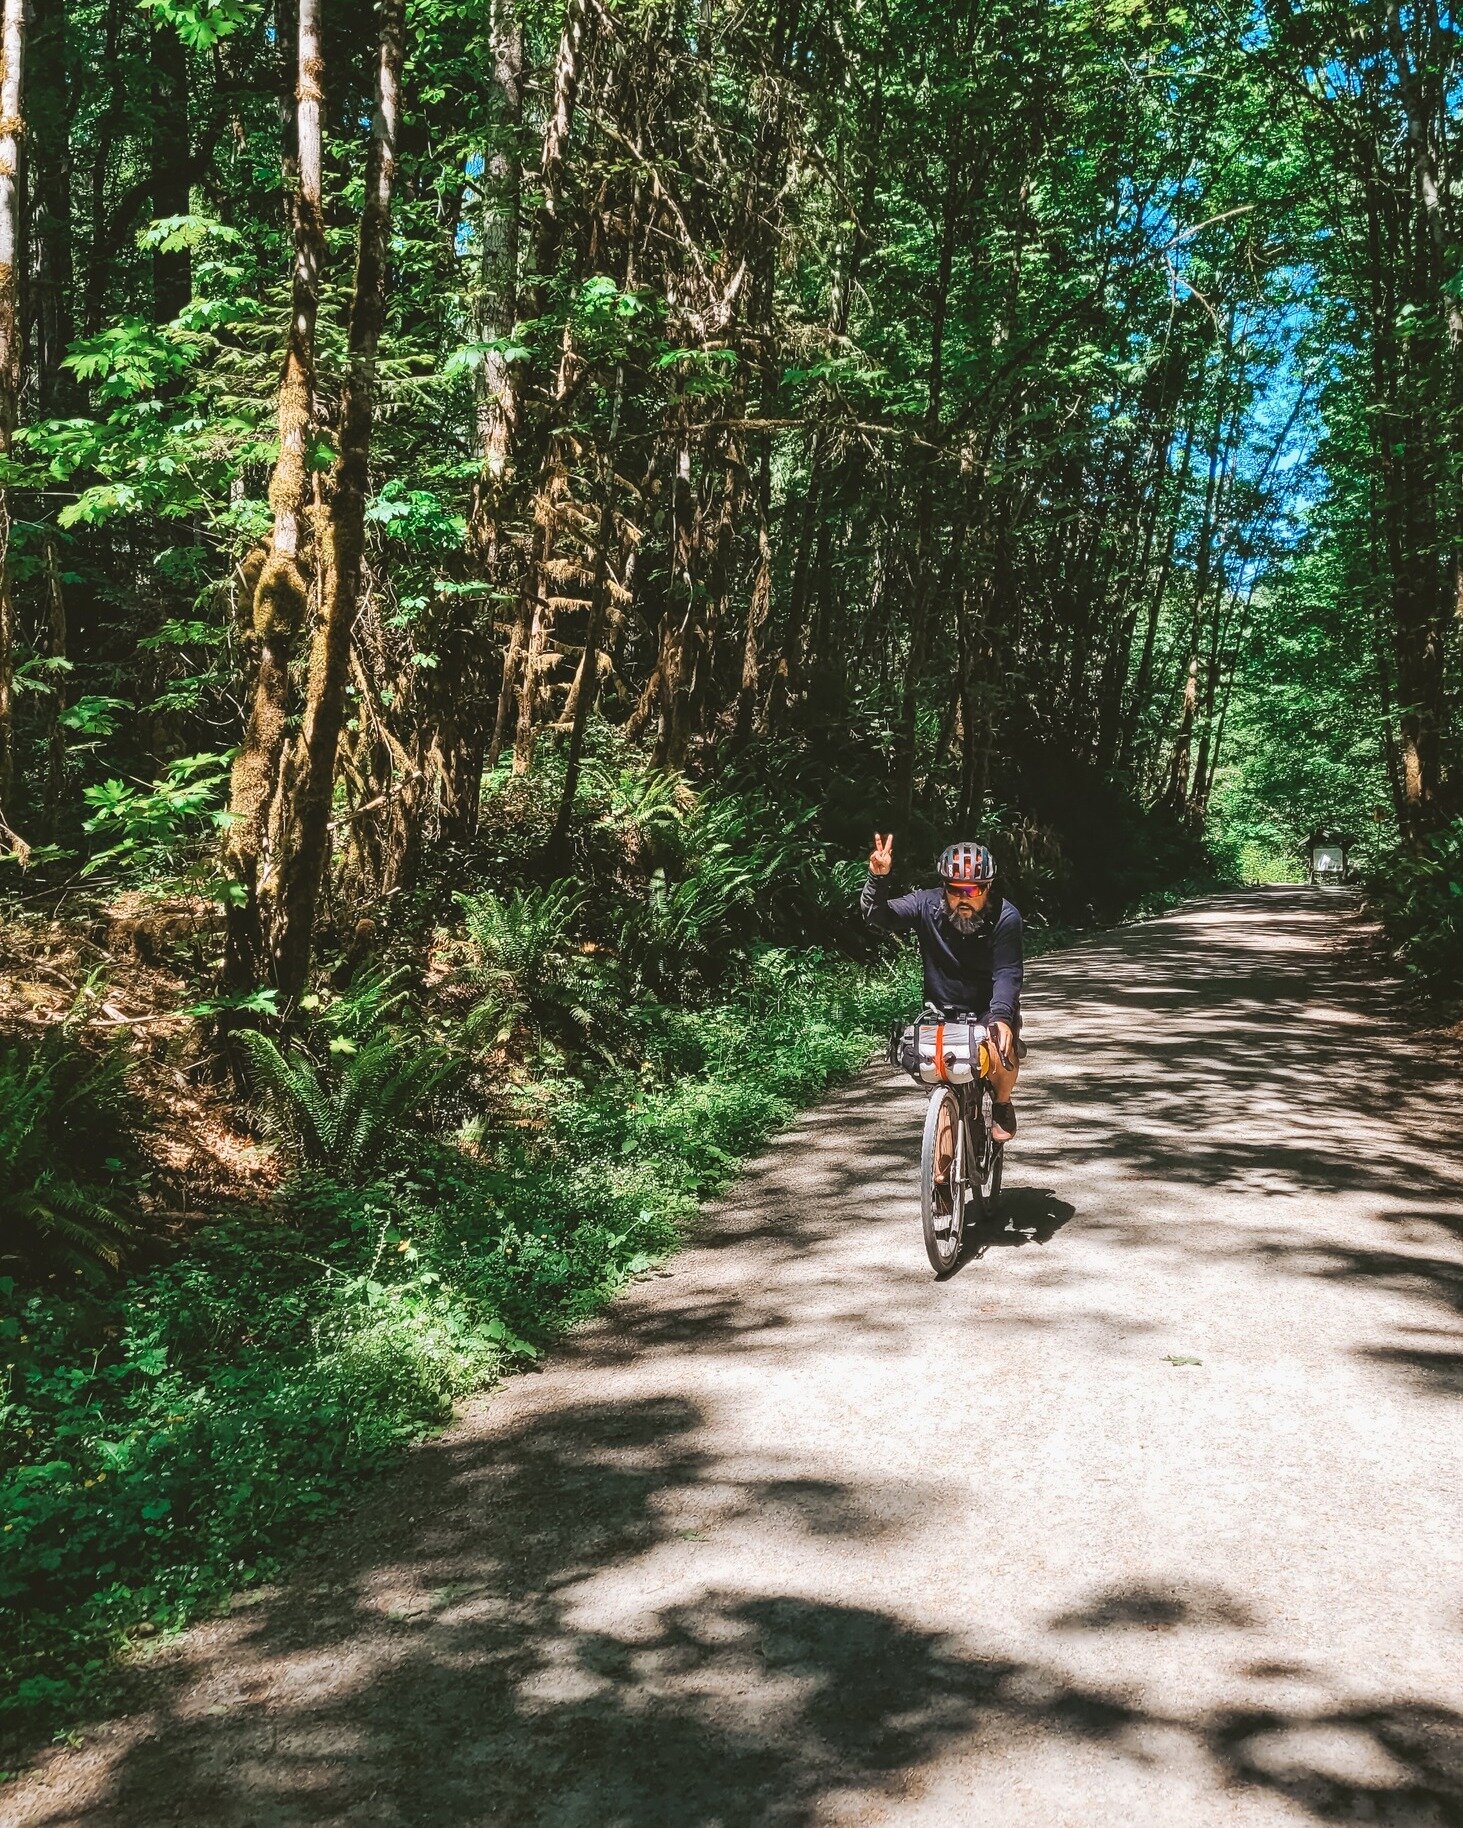 A couple of weeks ago Sing joined us on the Cowichan Valley Campout tour. It was a great weekend getaway riding beautiful gravel trails and camping amongst the trees. We even got to see the Belgium Waffle Ride zooming past!
.
#bikepacking #britishcol